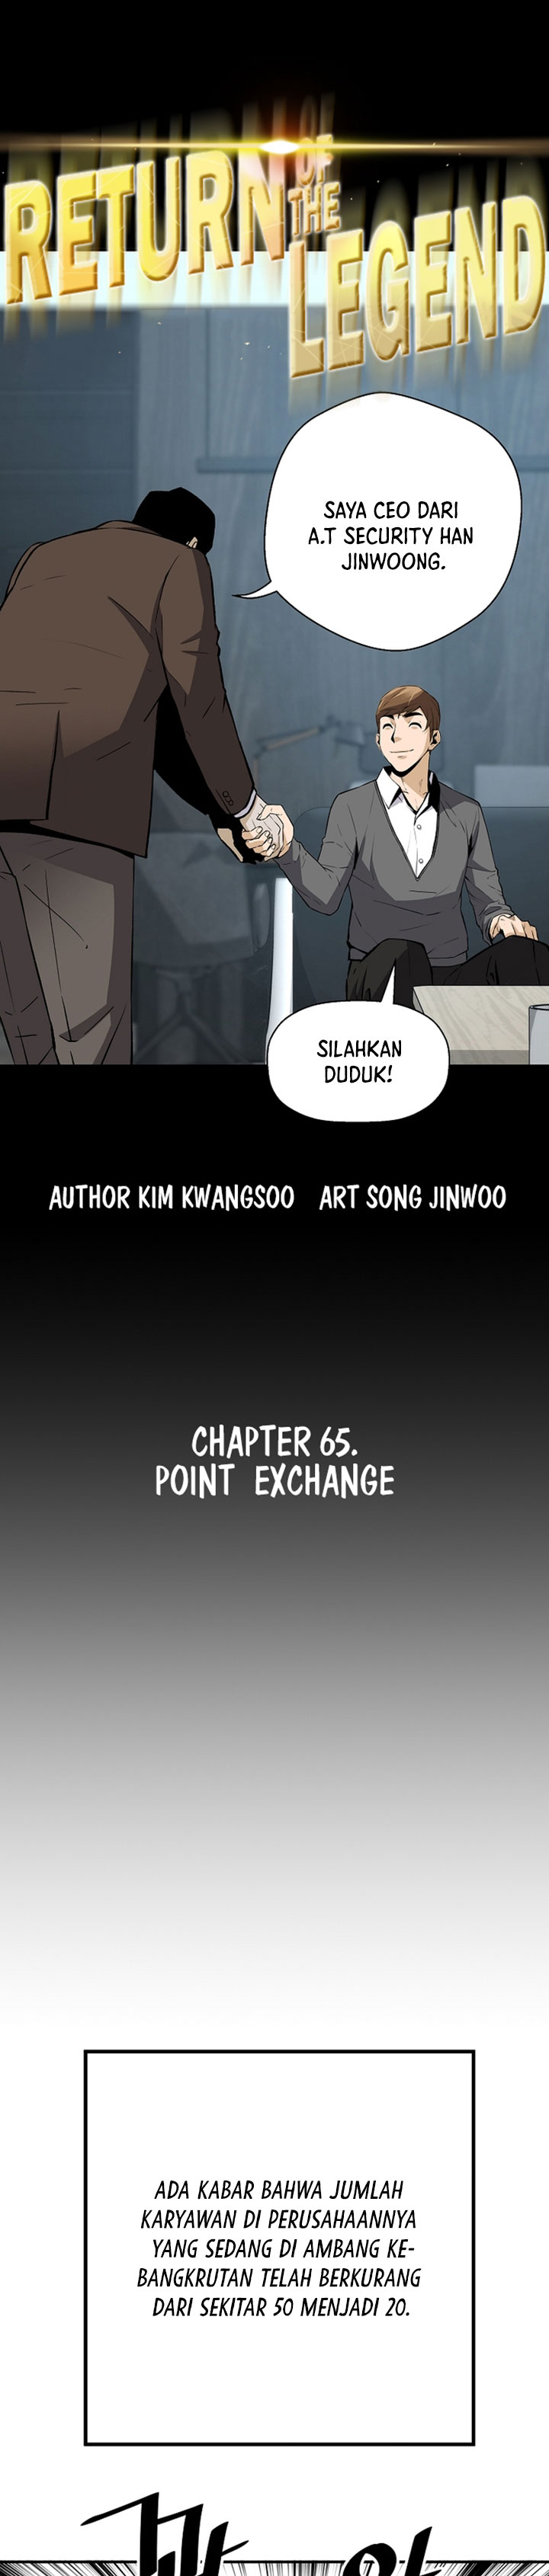 Return of the Legend Chapter 65